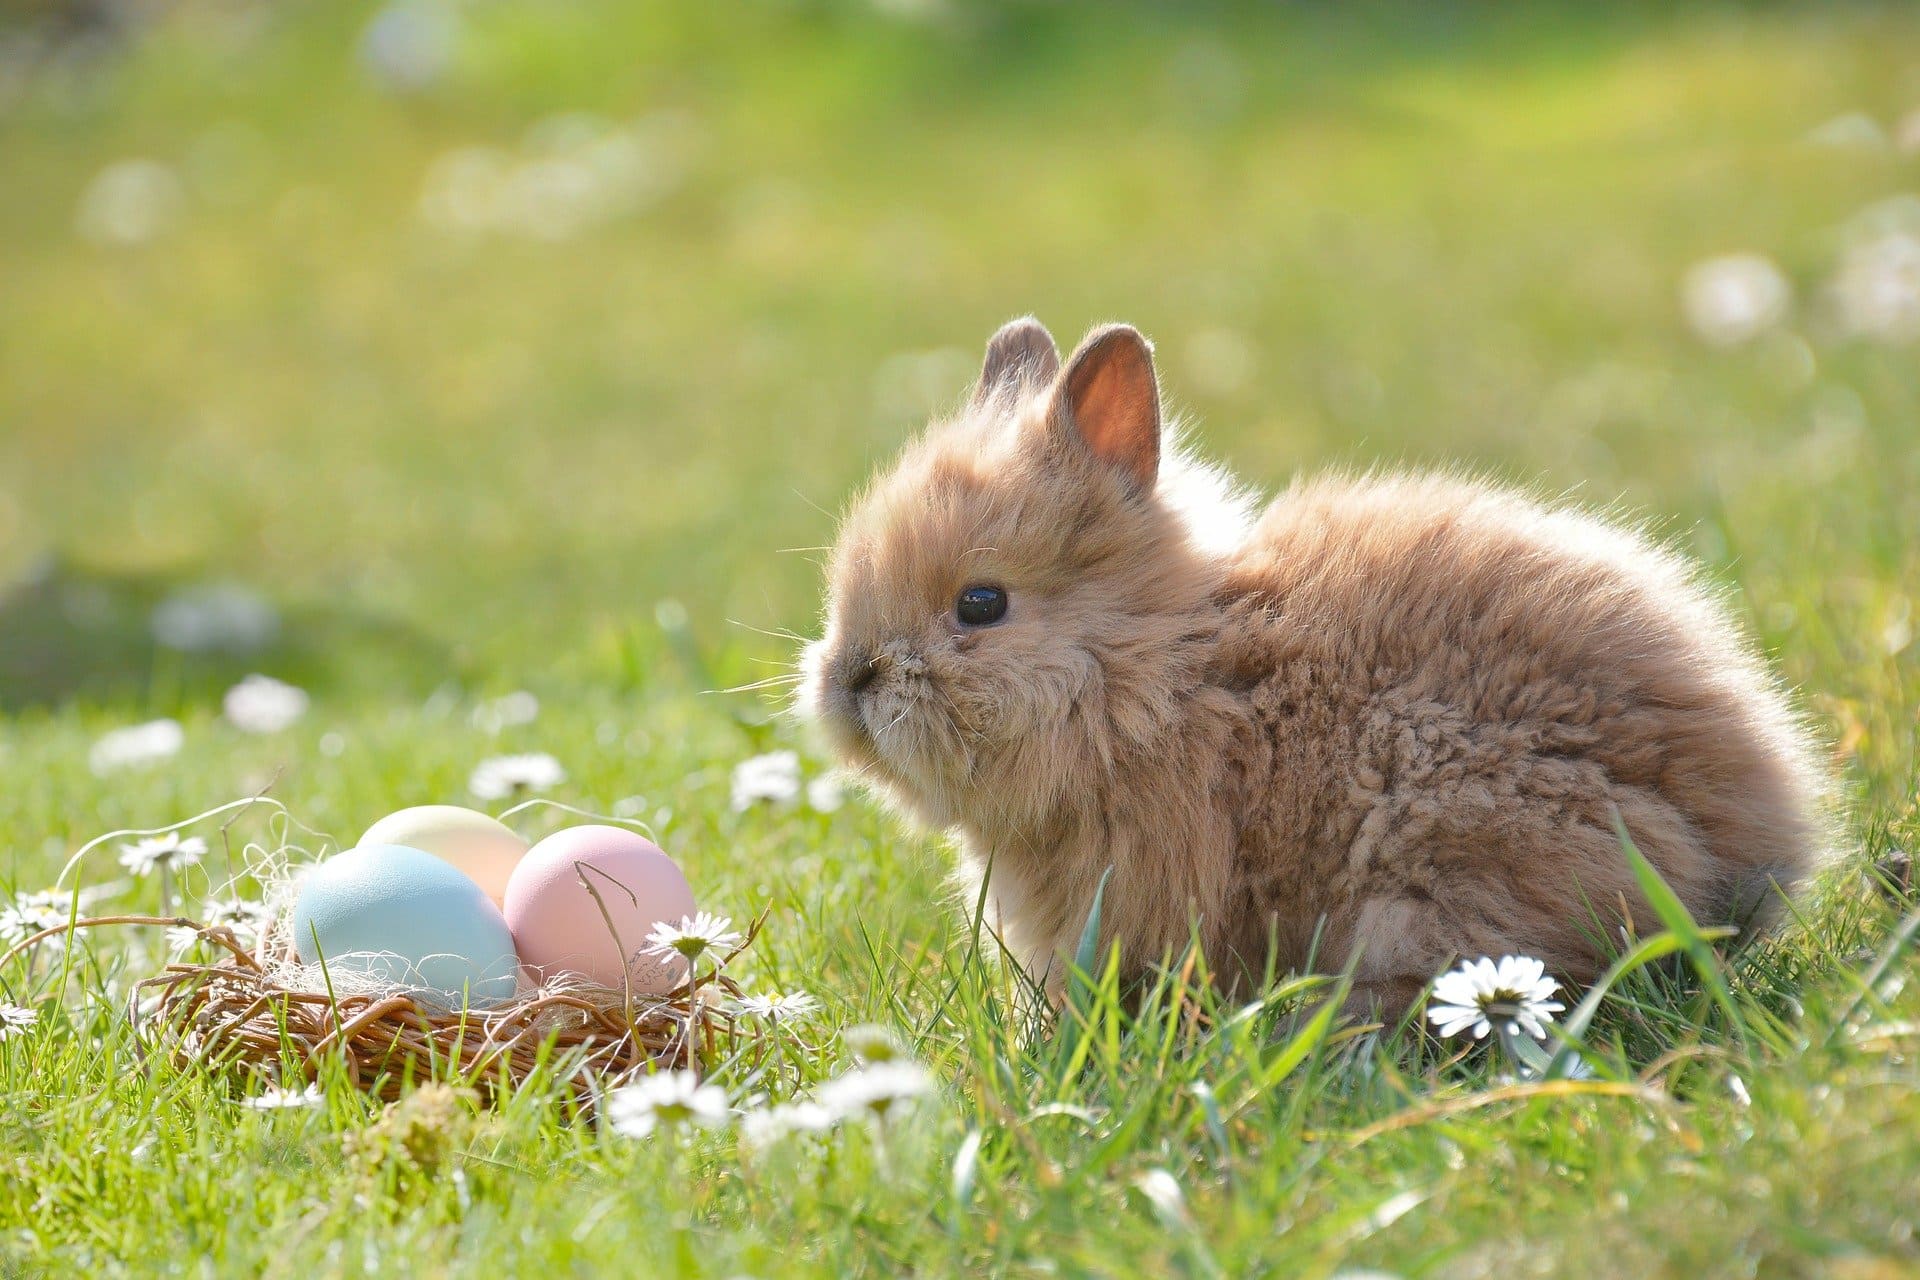 A small bunny and some easter eggs | Source: Pixabay